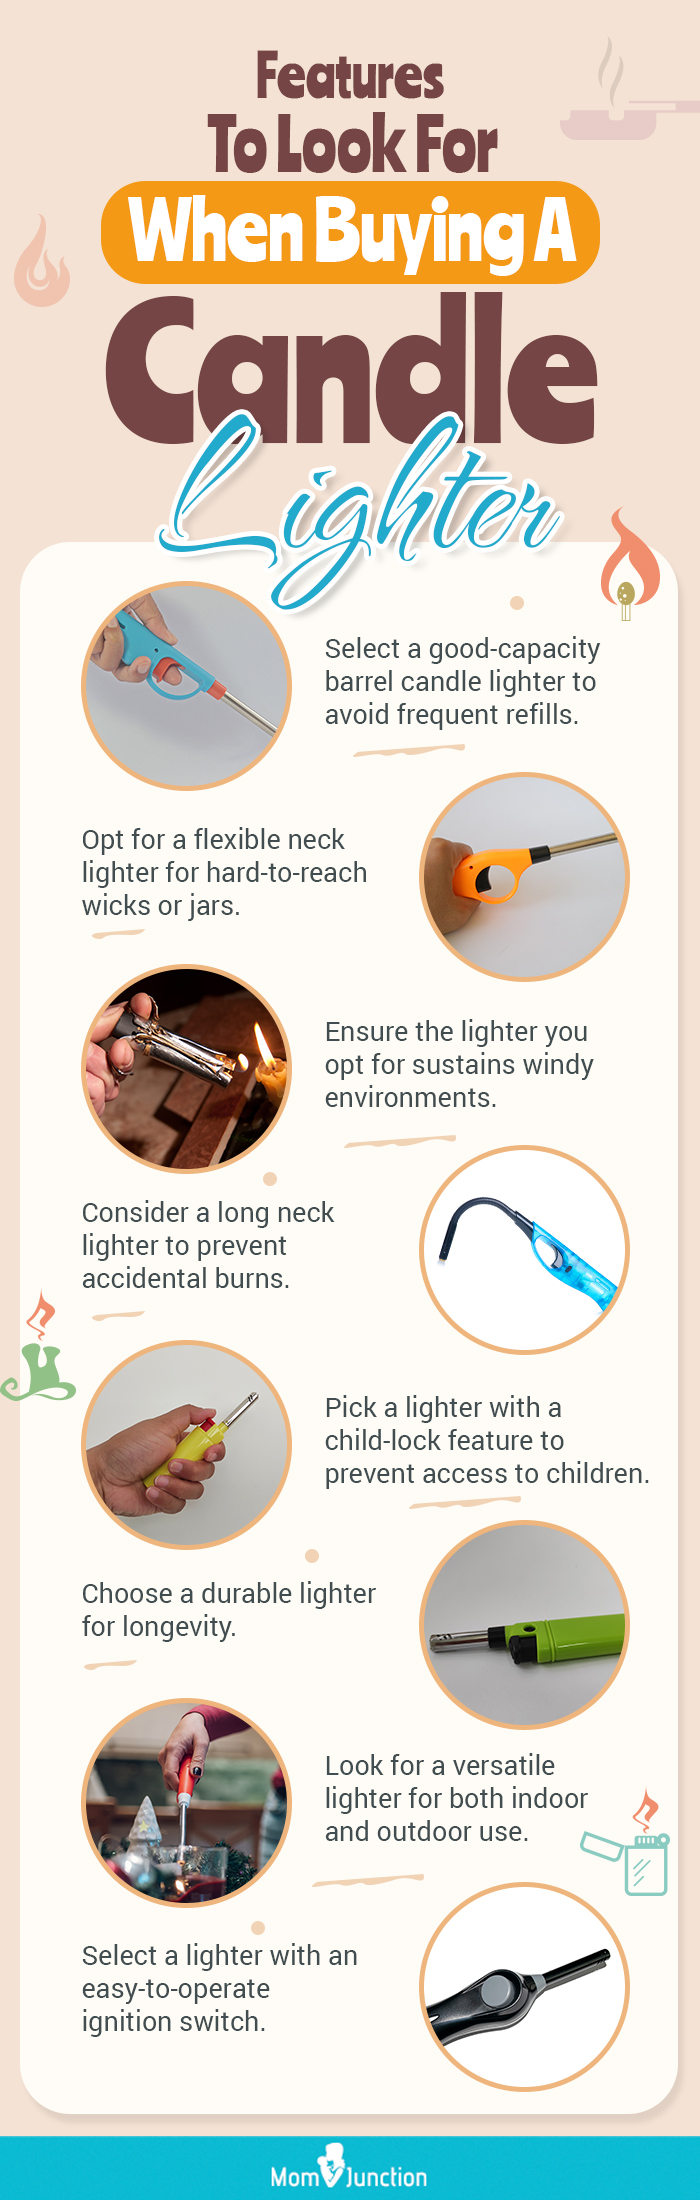 Features-To-Look-For-When-Buying-A-Candle-Lighter (infographic)